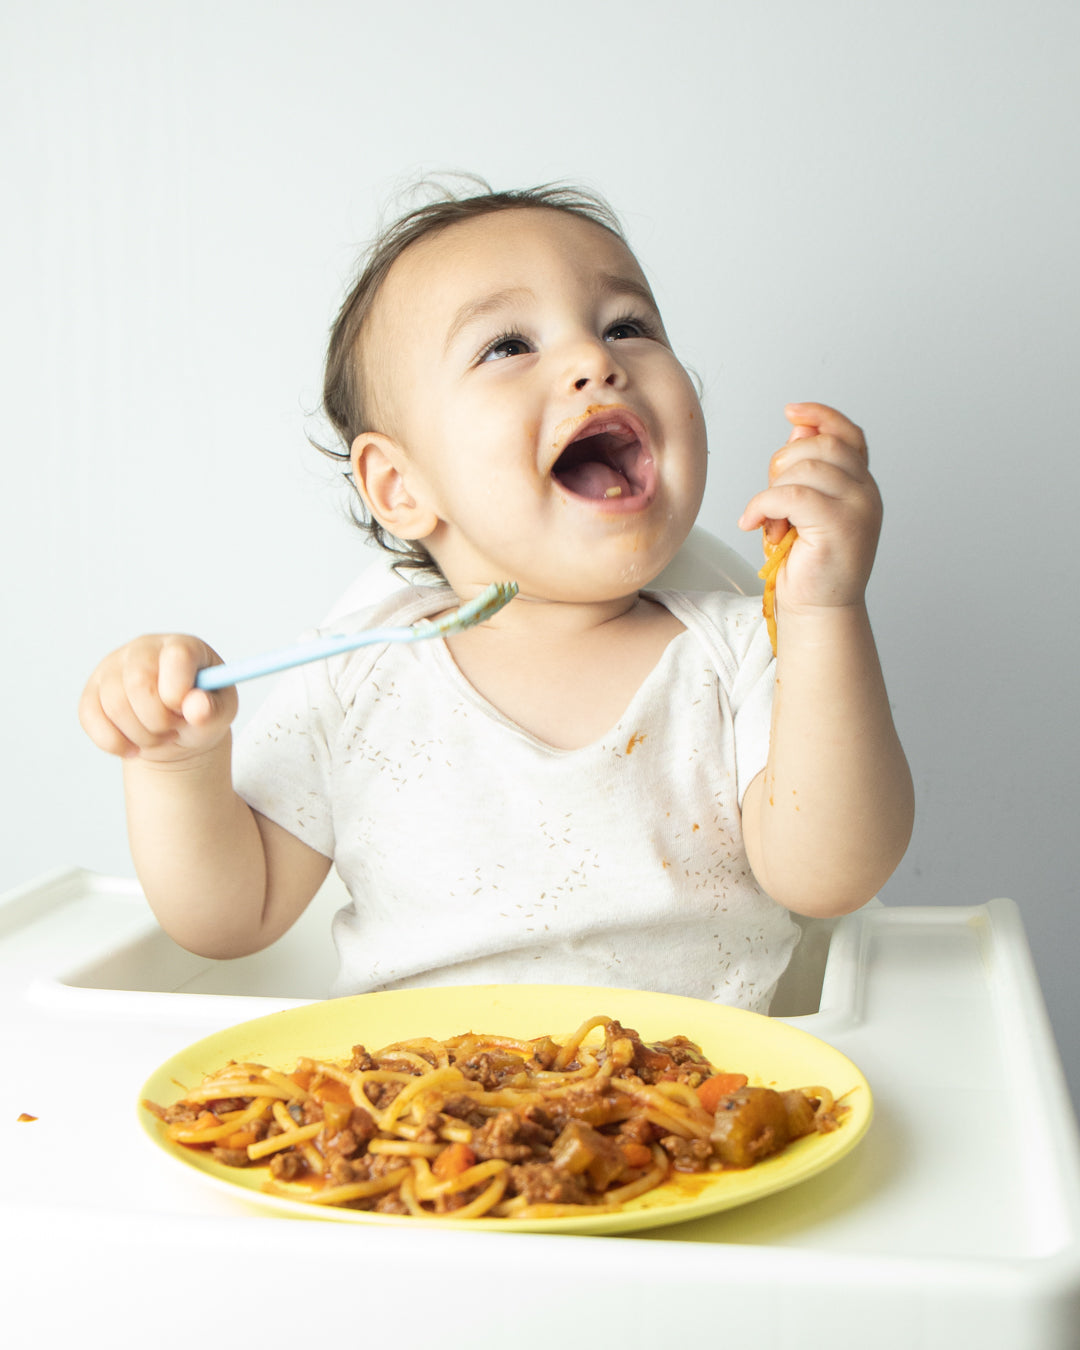 The Complete Weaning Checklist